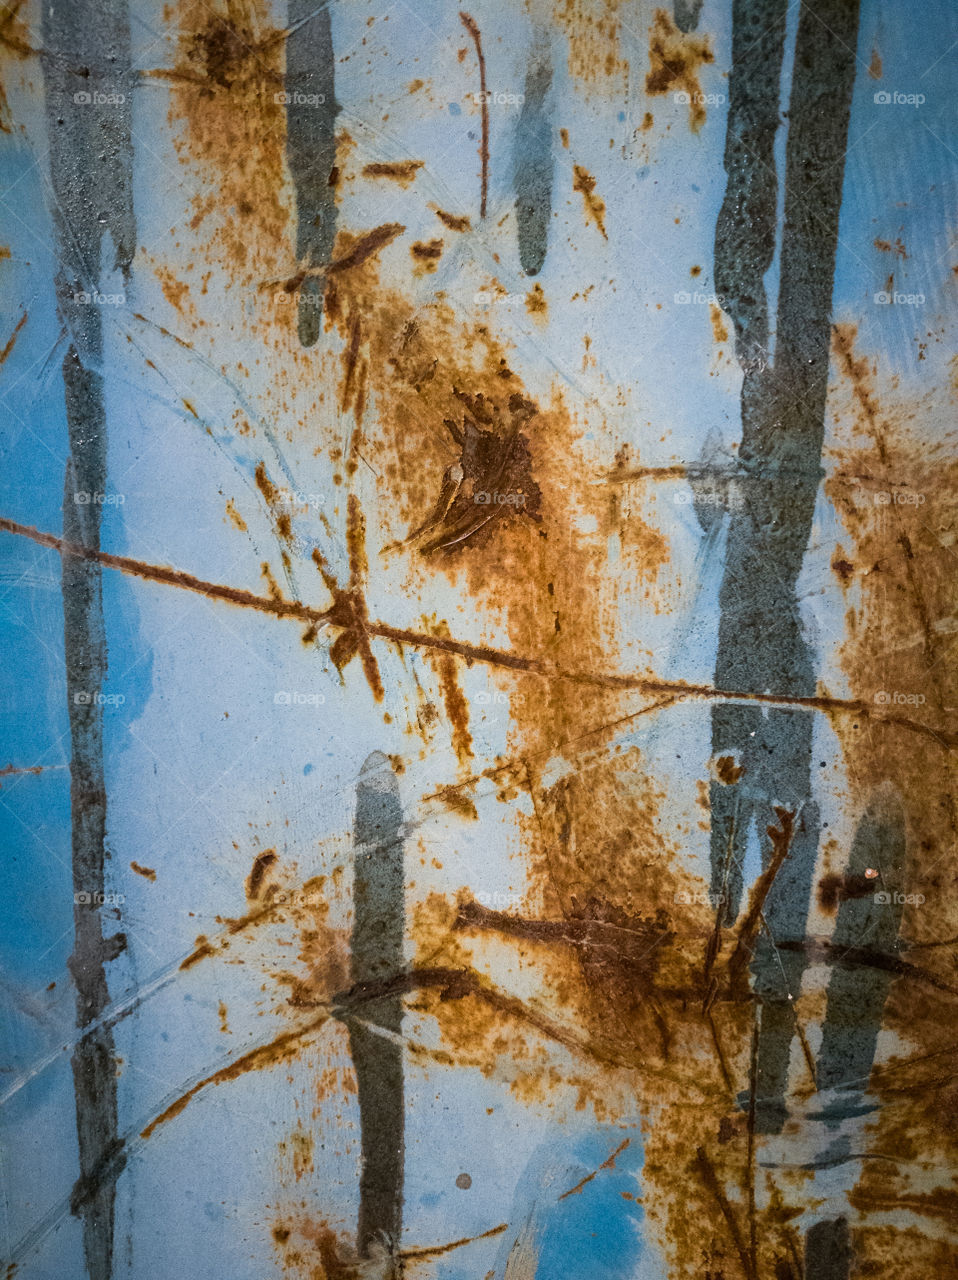 old rusty metal surface creates some abstract textures on a light blue background